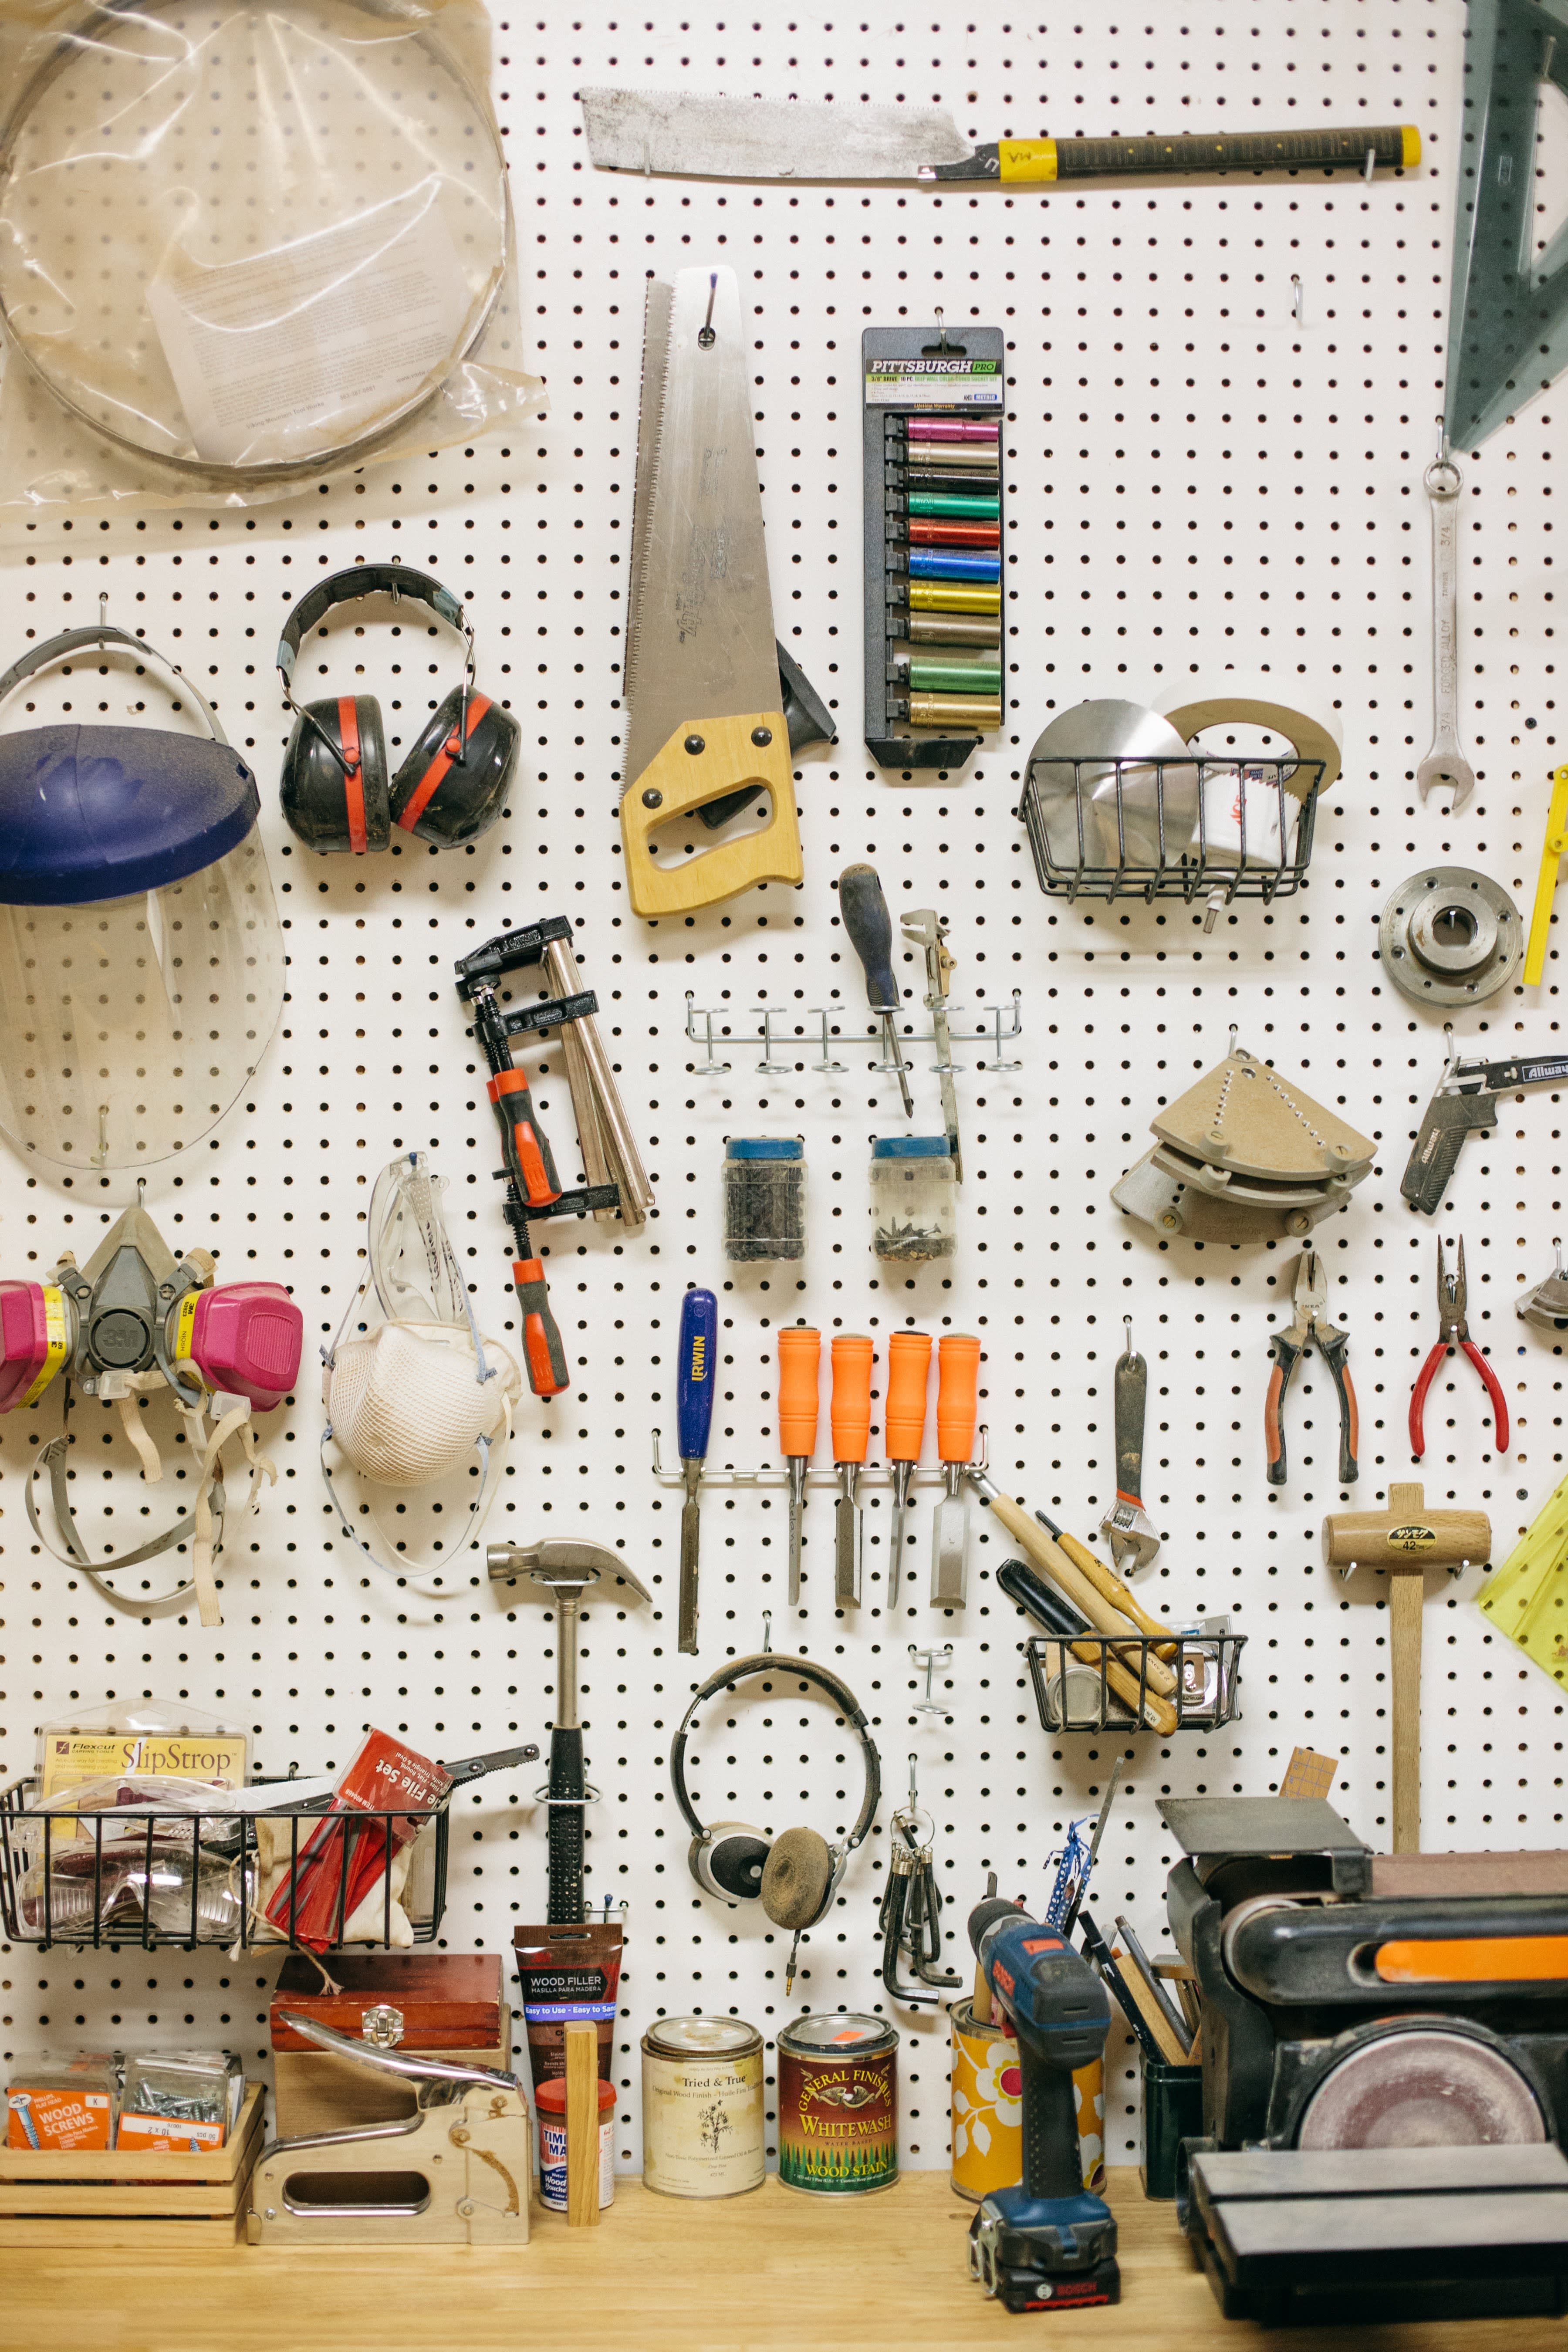 10 Things You Should Always Keep in Your Garage, According to Real